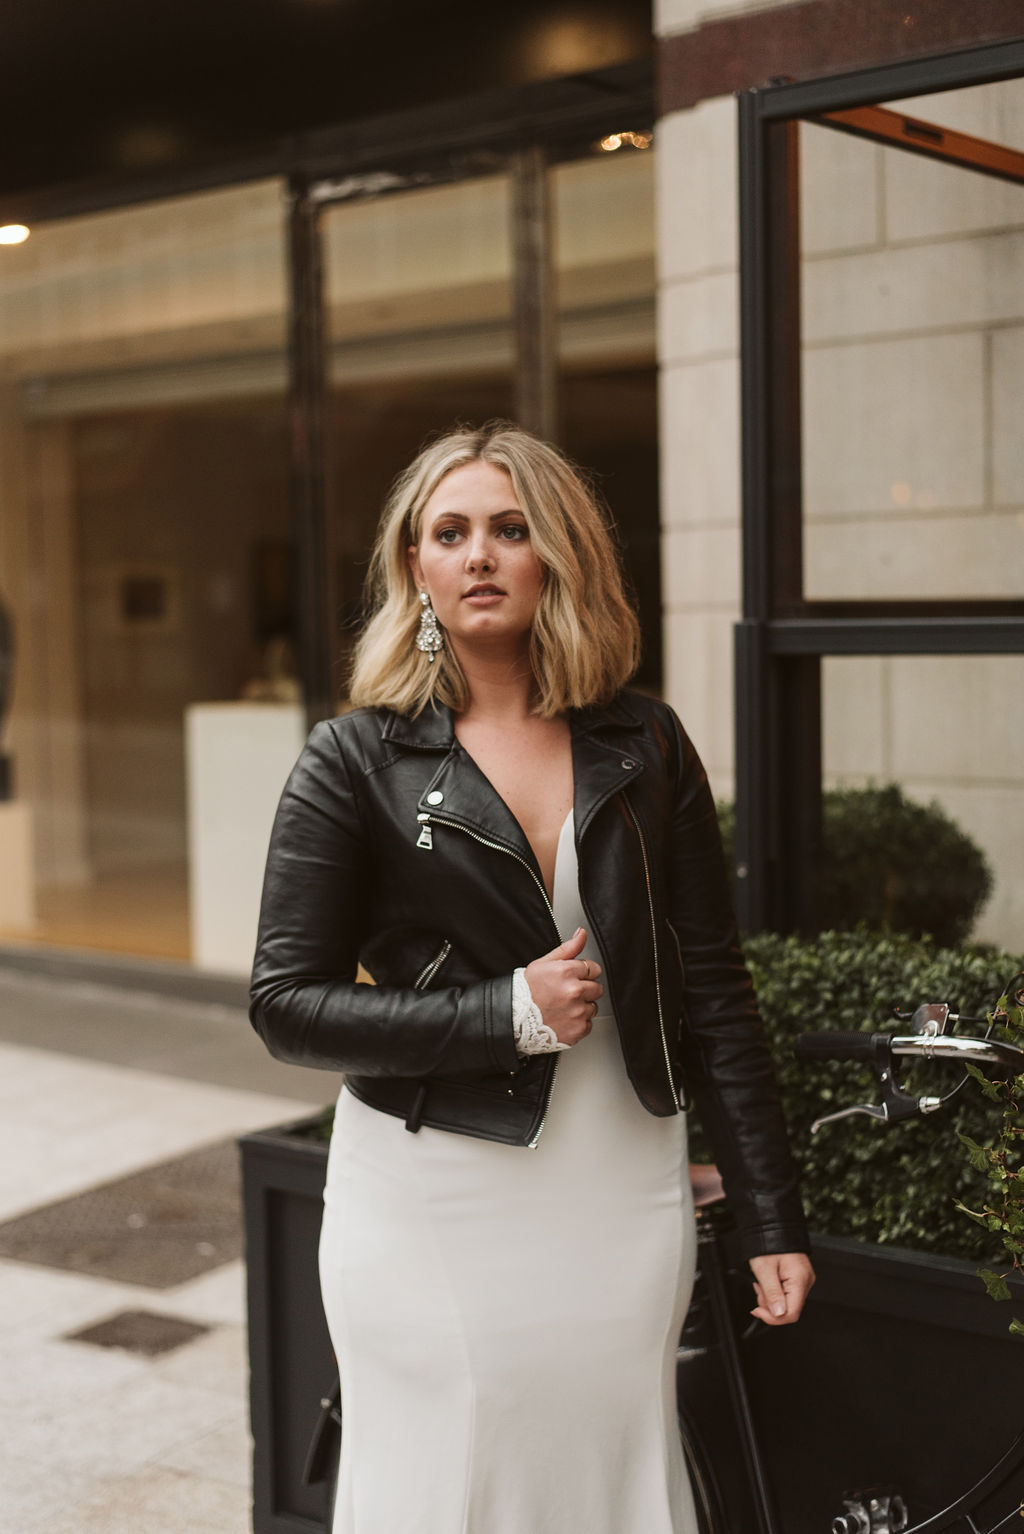 Bride wearing a simple wedding dress and leather moto jacket in Dublin Ireland